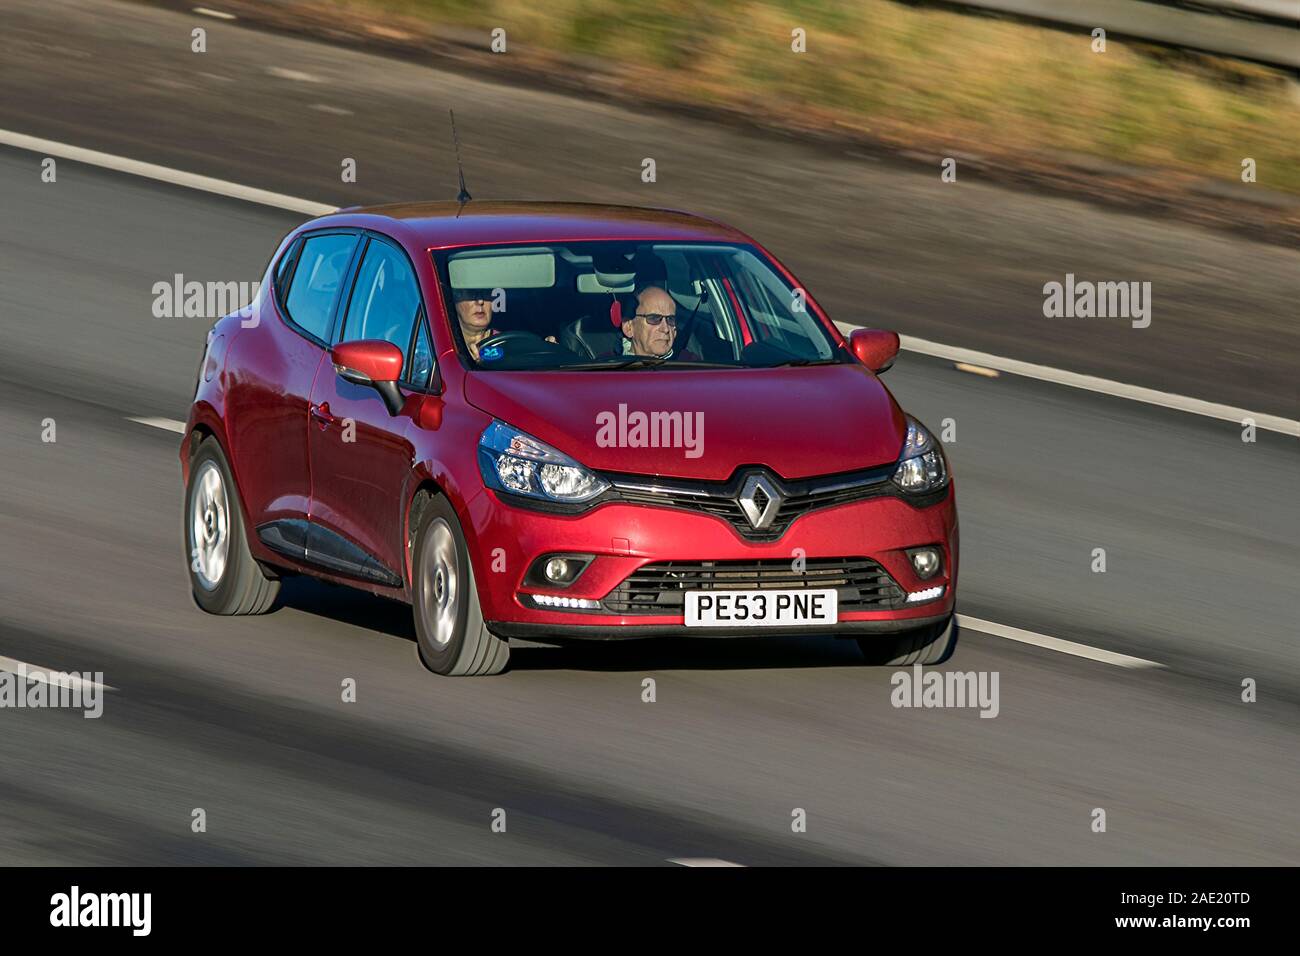 Blurred moving car Renault Clio Dynamique Nav traveling at speed on the M61 motorway Slow camera shutter speed vehicle movement Stock Photo